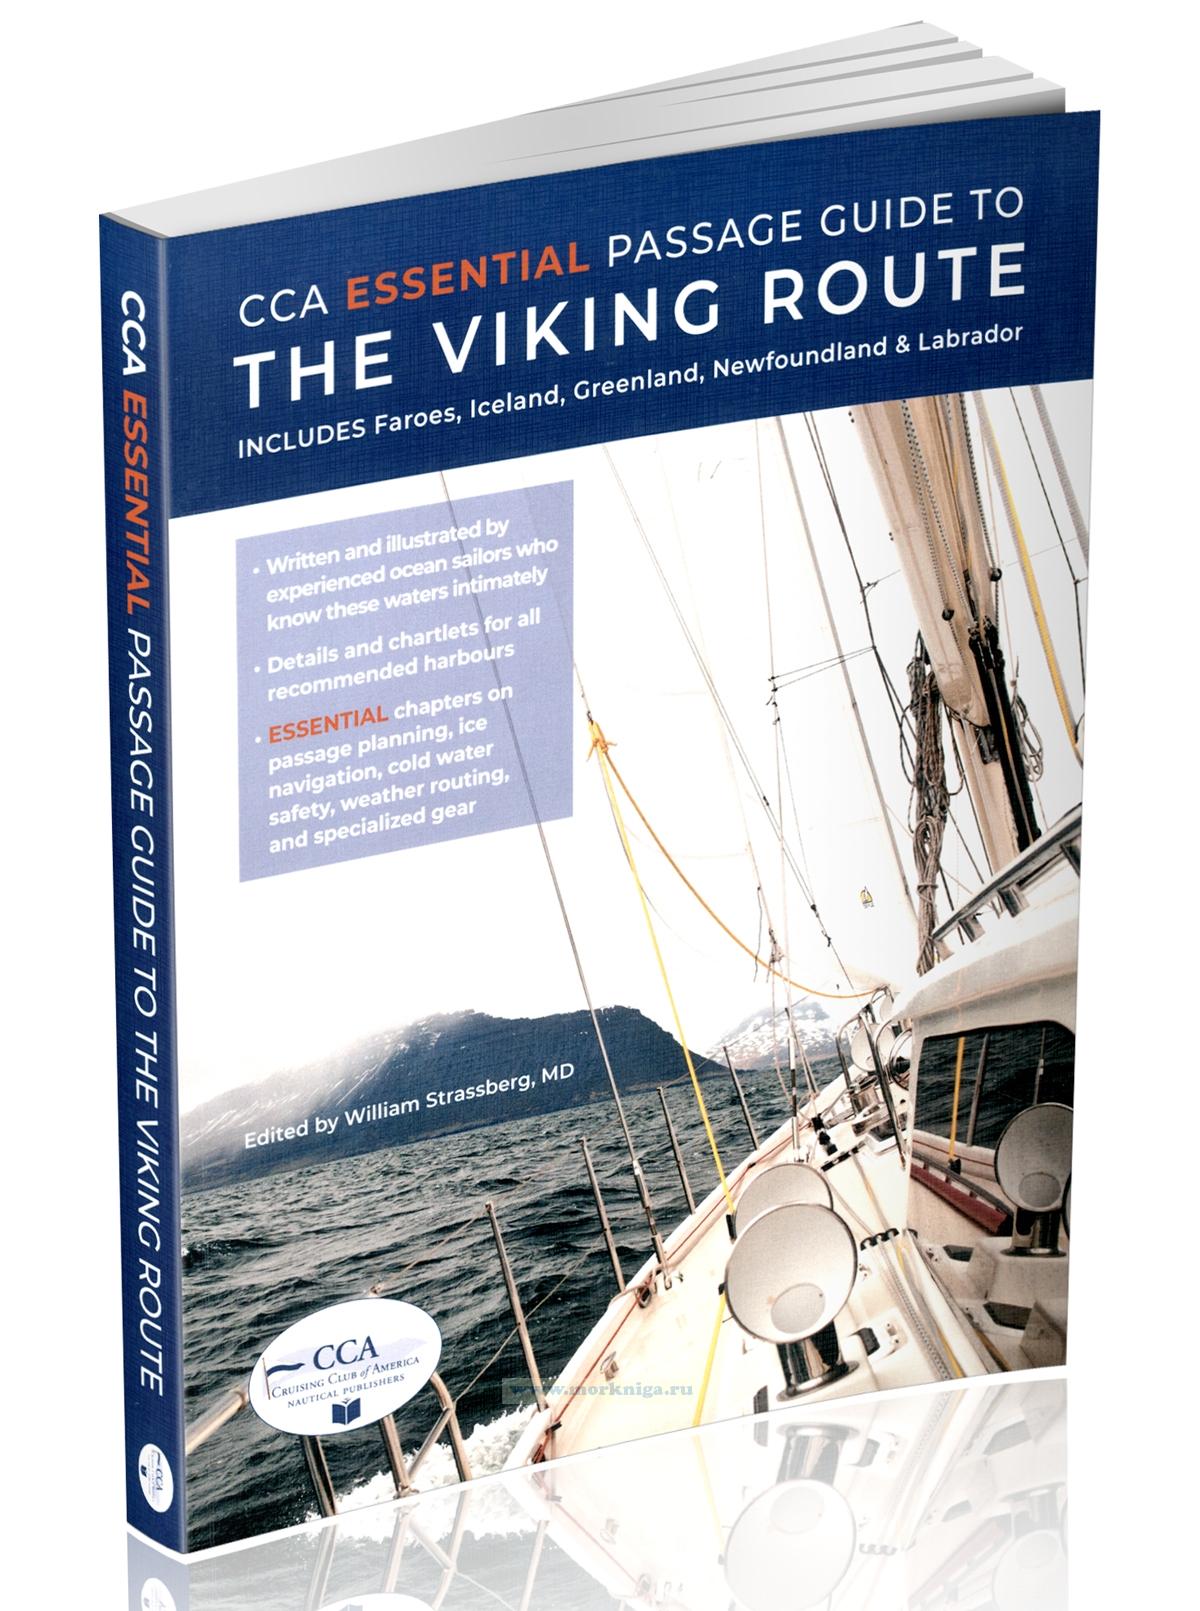 The Viking Route